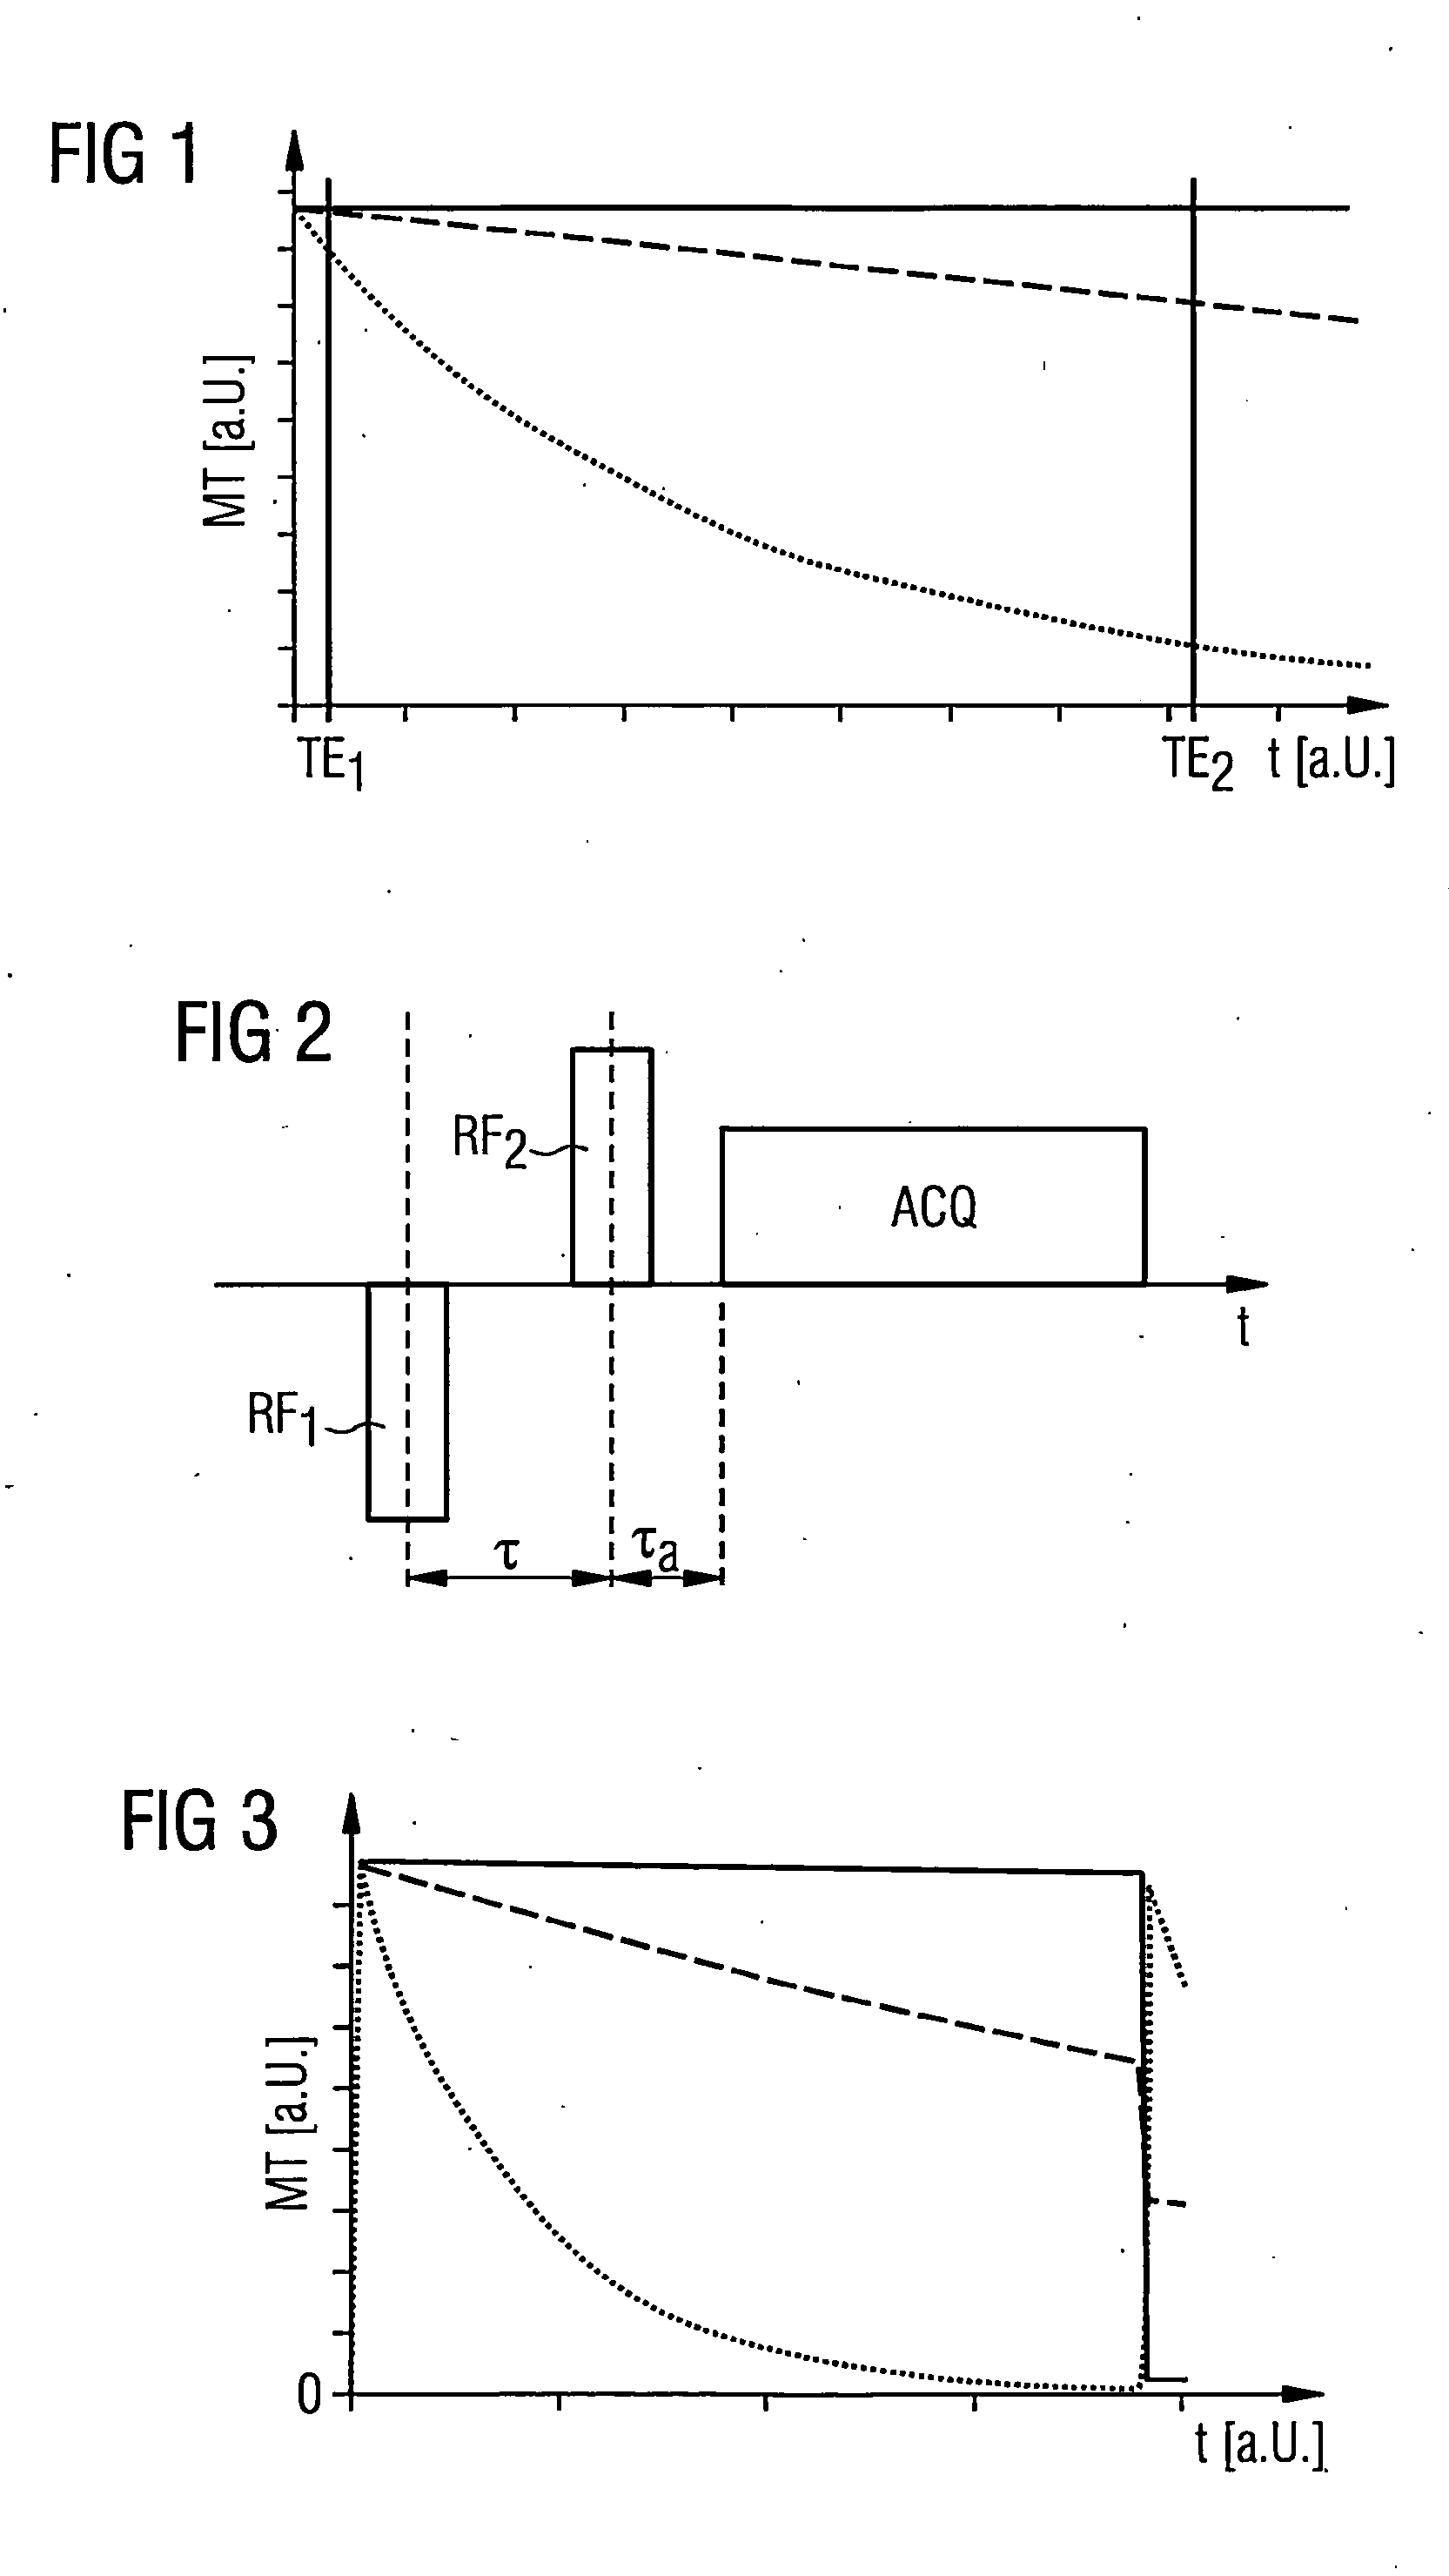 Magnetic resonance system, operating method and control device to generate t2-weighted images using a pulse sequence with very short echo times